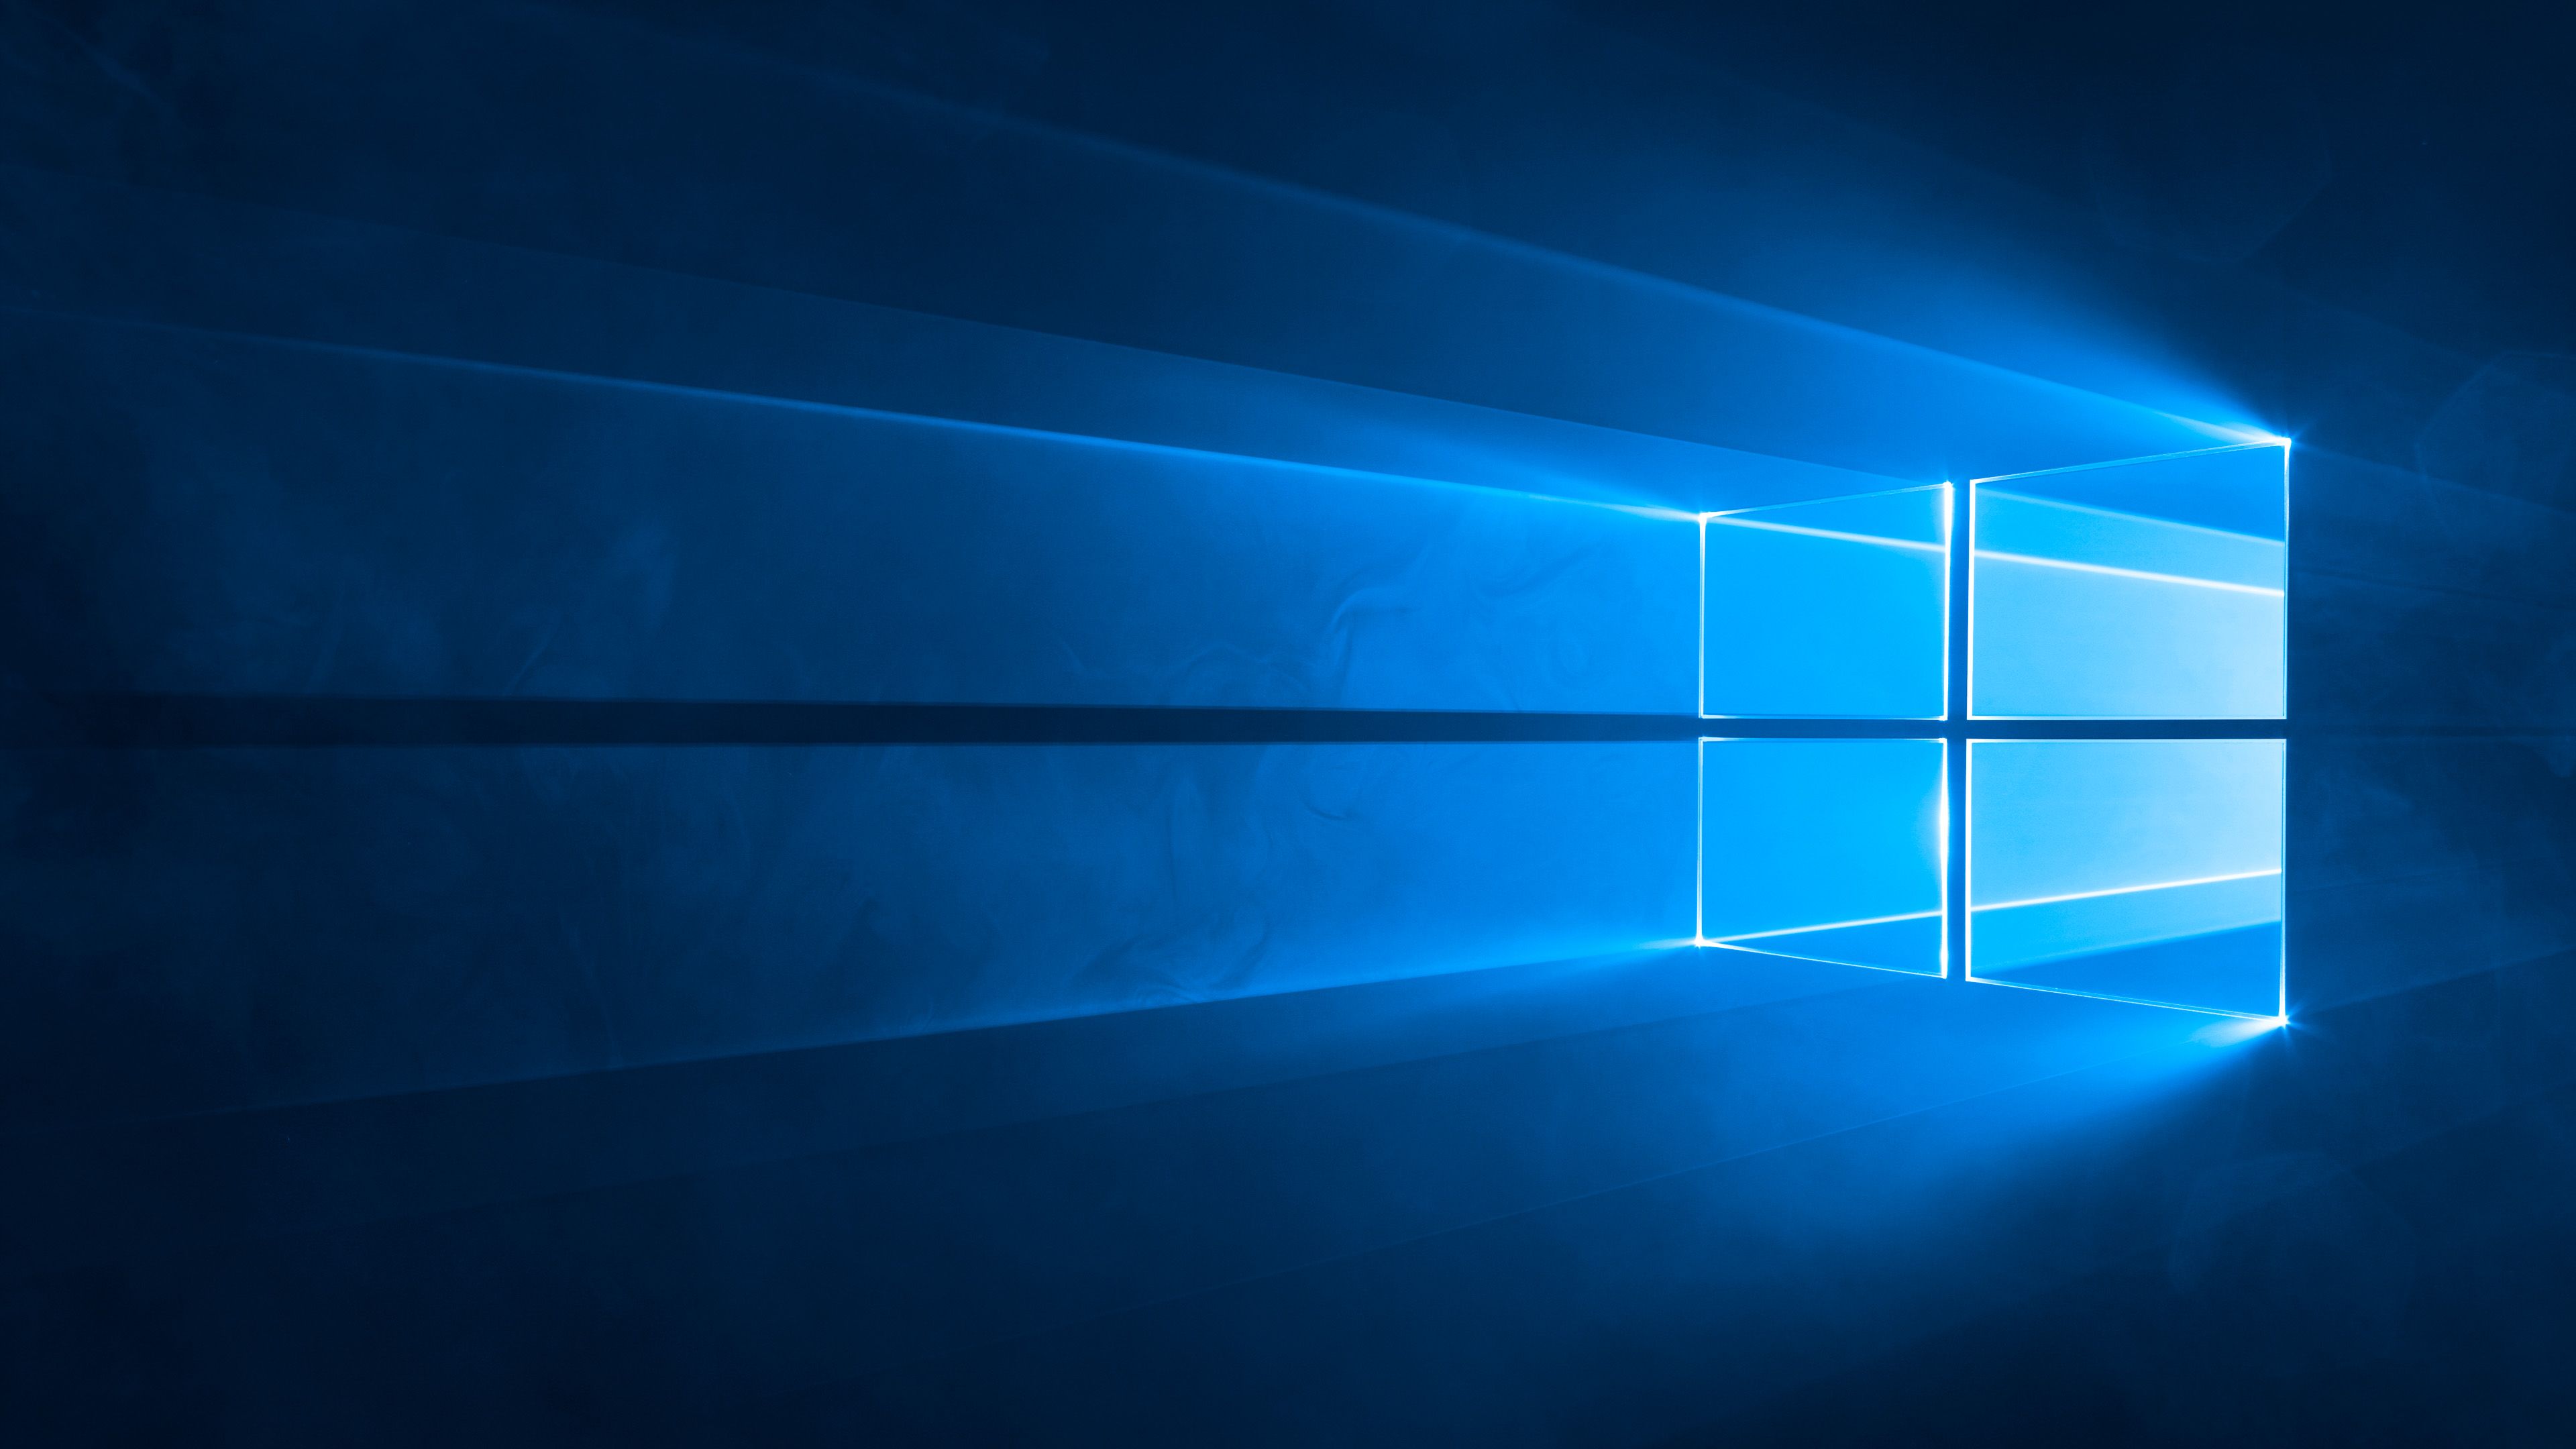 How to Get the Old Windows 10 Default Wallpapers Back